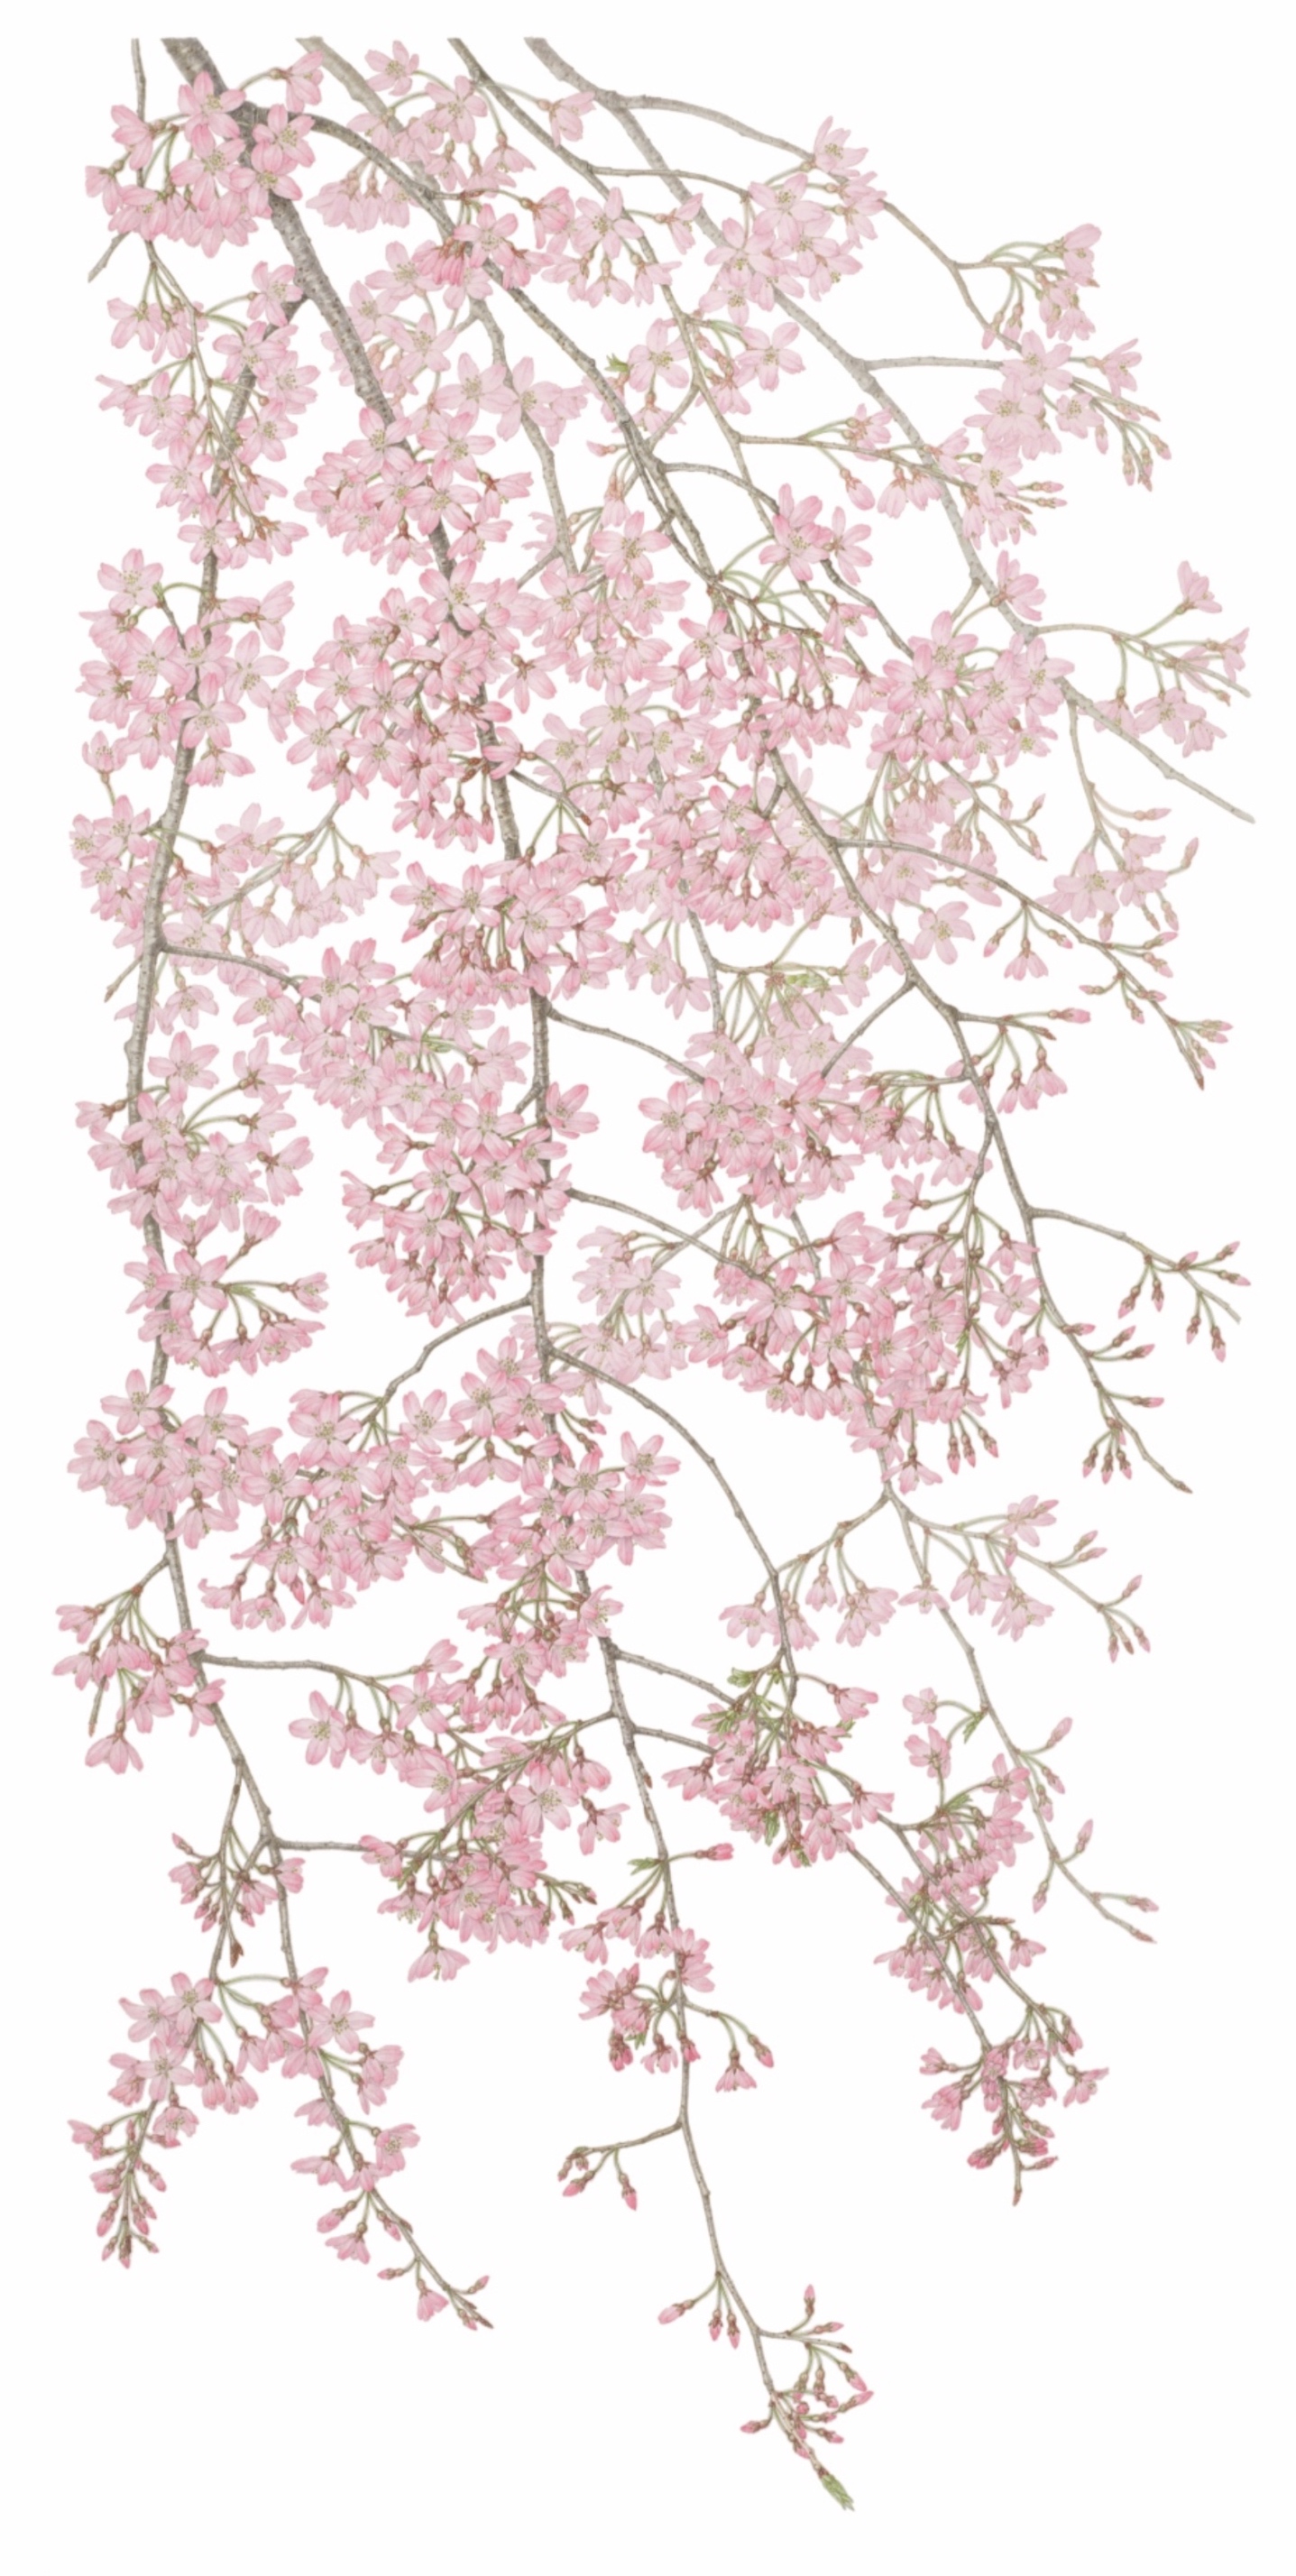 Lots of light pink cherry blossom cascading down from brown stems